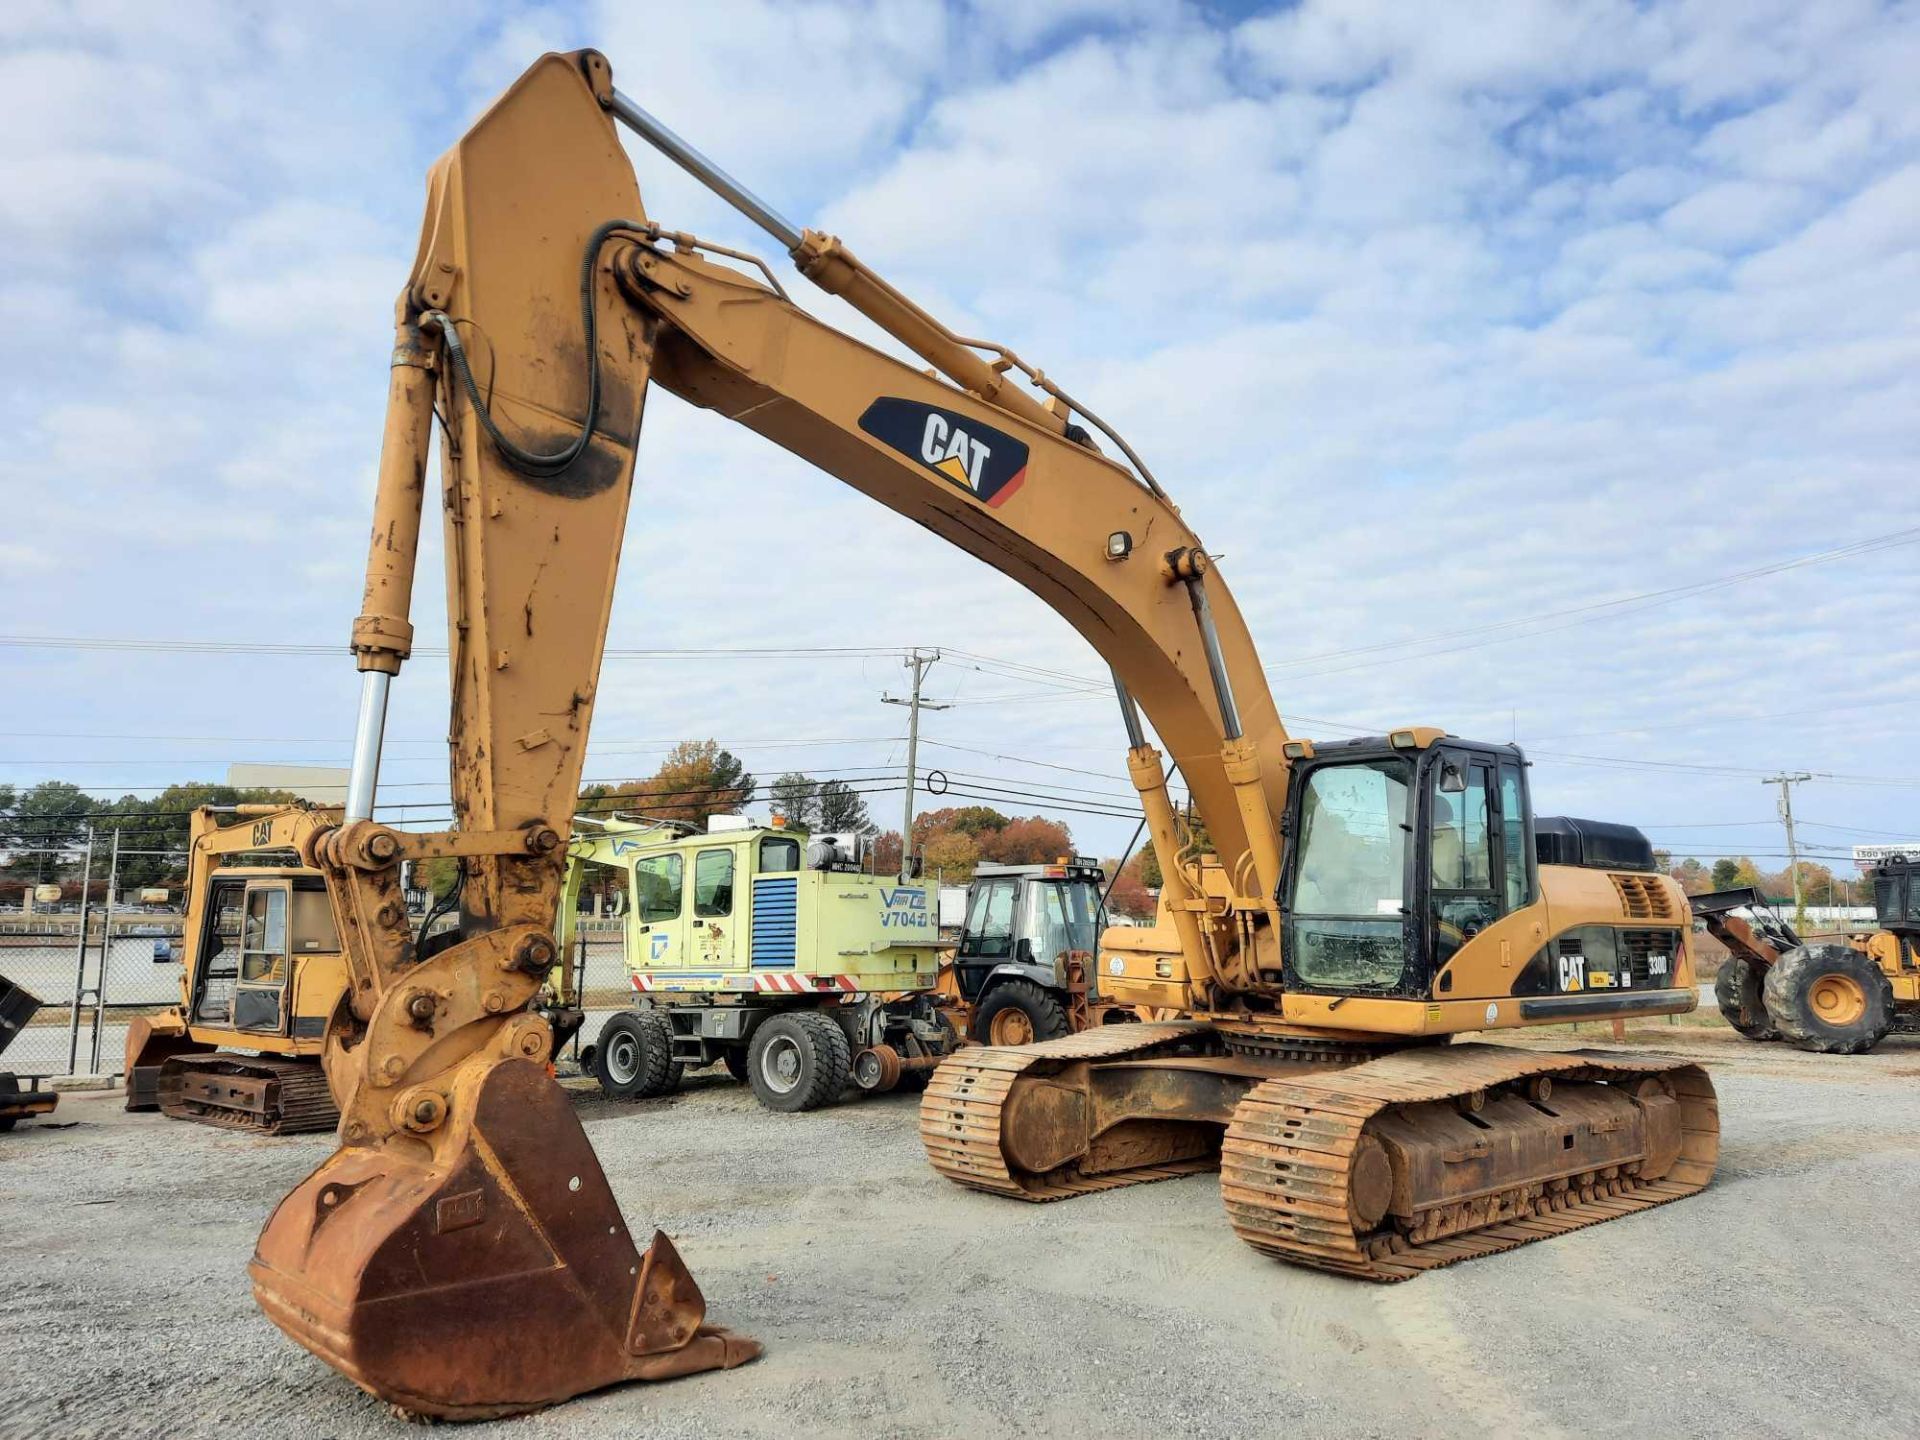 (SUBJECT TO OWNER CONFIRMATION) 2007 Caterpillar 330DL Excavator